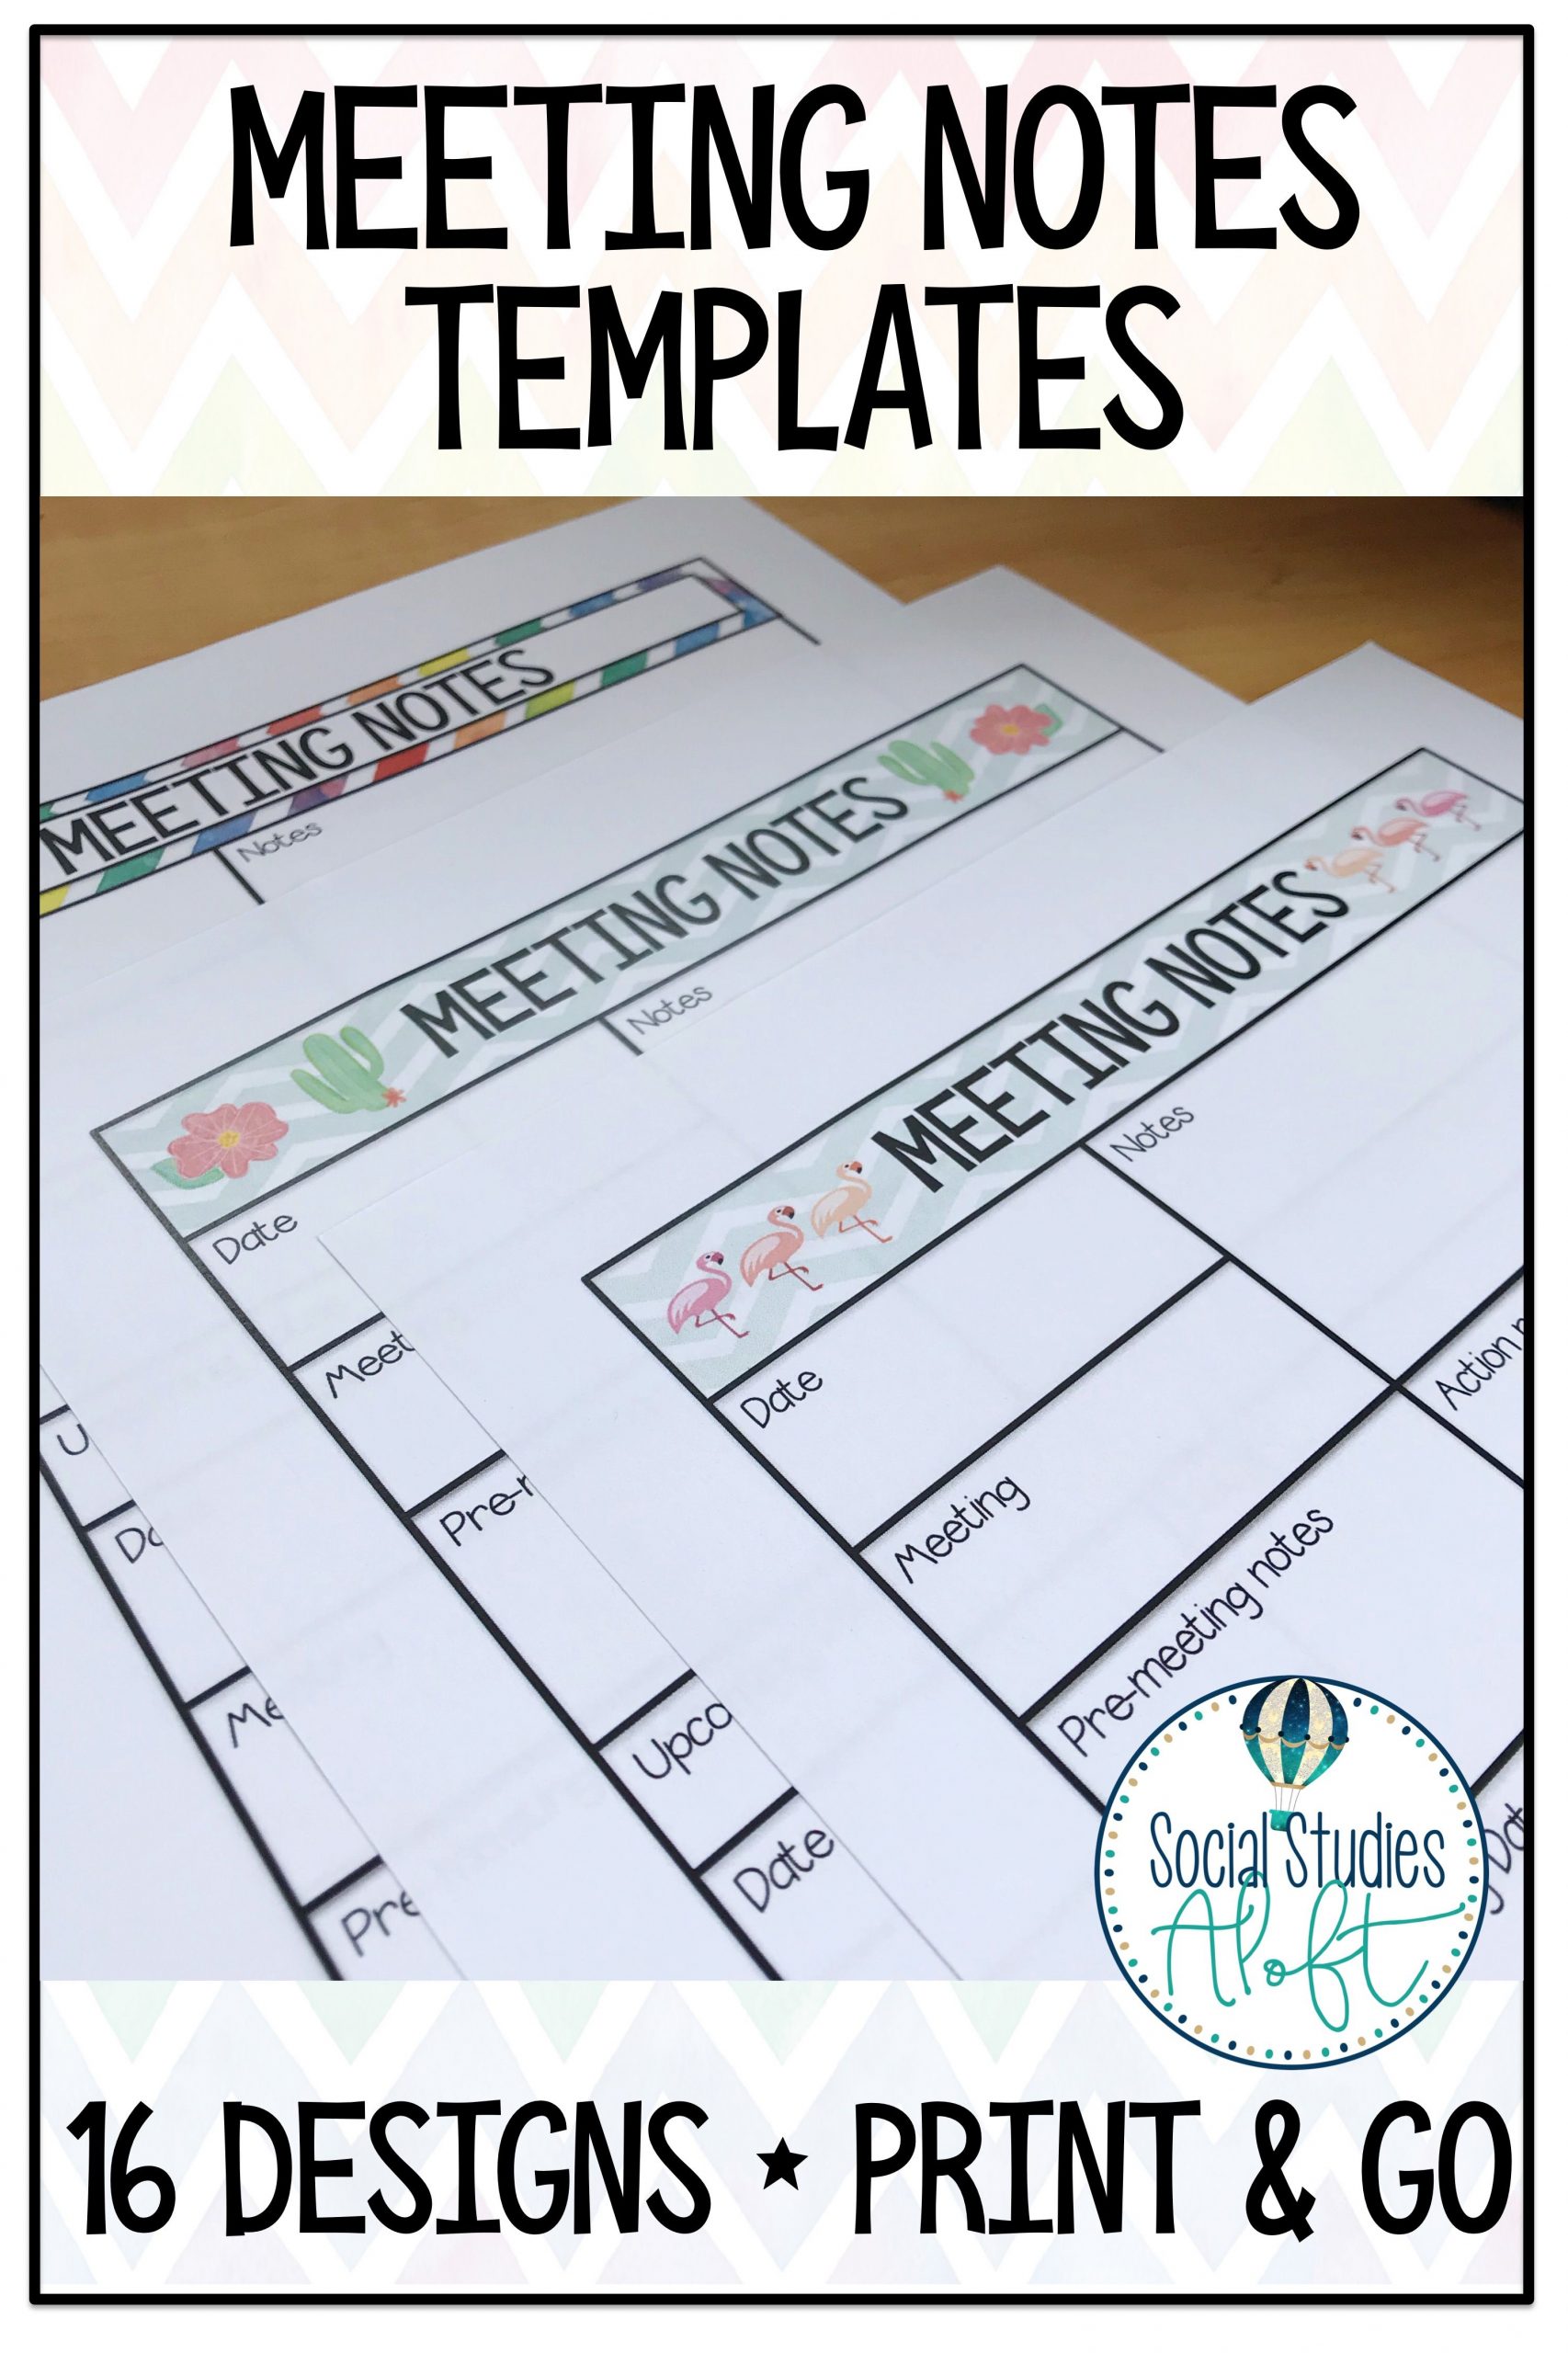 Meeting Notes Templates For Teachers 16 Colorful Designs in size 2999 X 4499